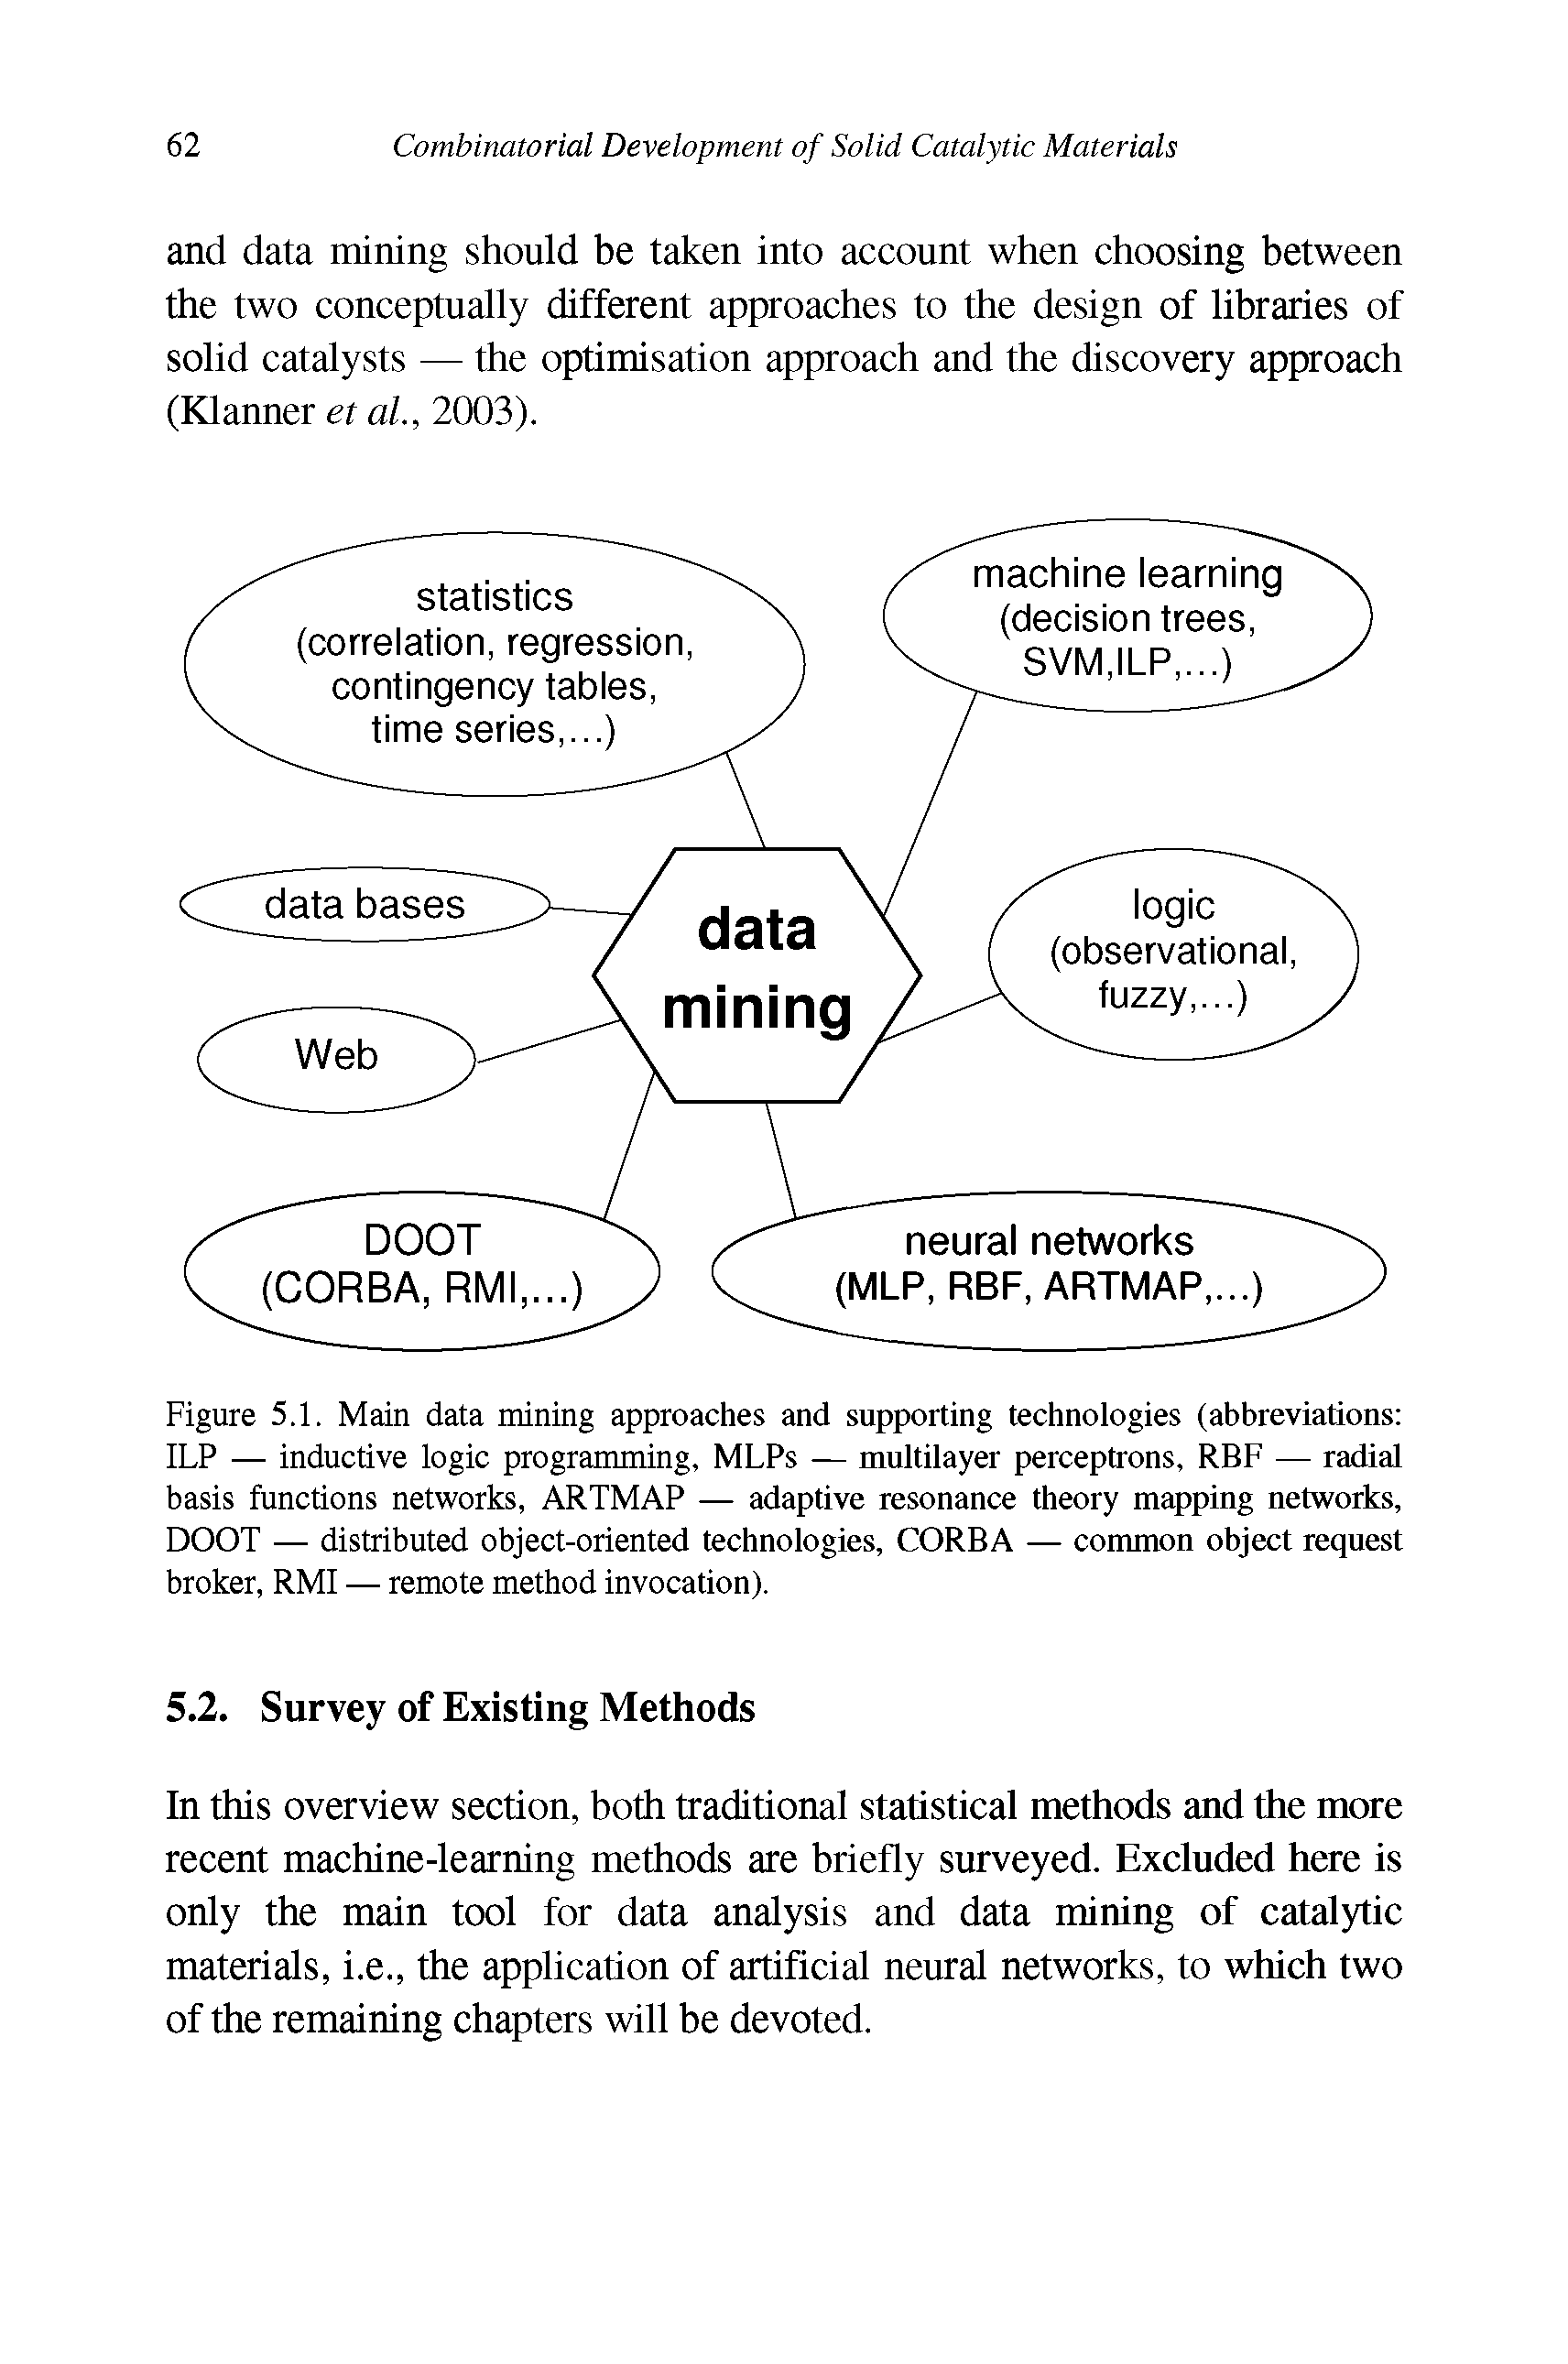 Figure 5.1. Main data mining approaches and supporting technologies (abbreviations ILP — inductive logic programming, MLPs — multilayer perceptrons, RBF — radial basis functions networks, ARTMAP — adaptive resonance theory mapping networks, DOOT — distributed object-oriented technologies, CORBA — common object request broker, RMI — remote method invocation).